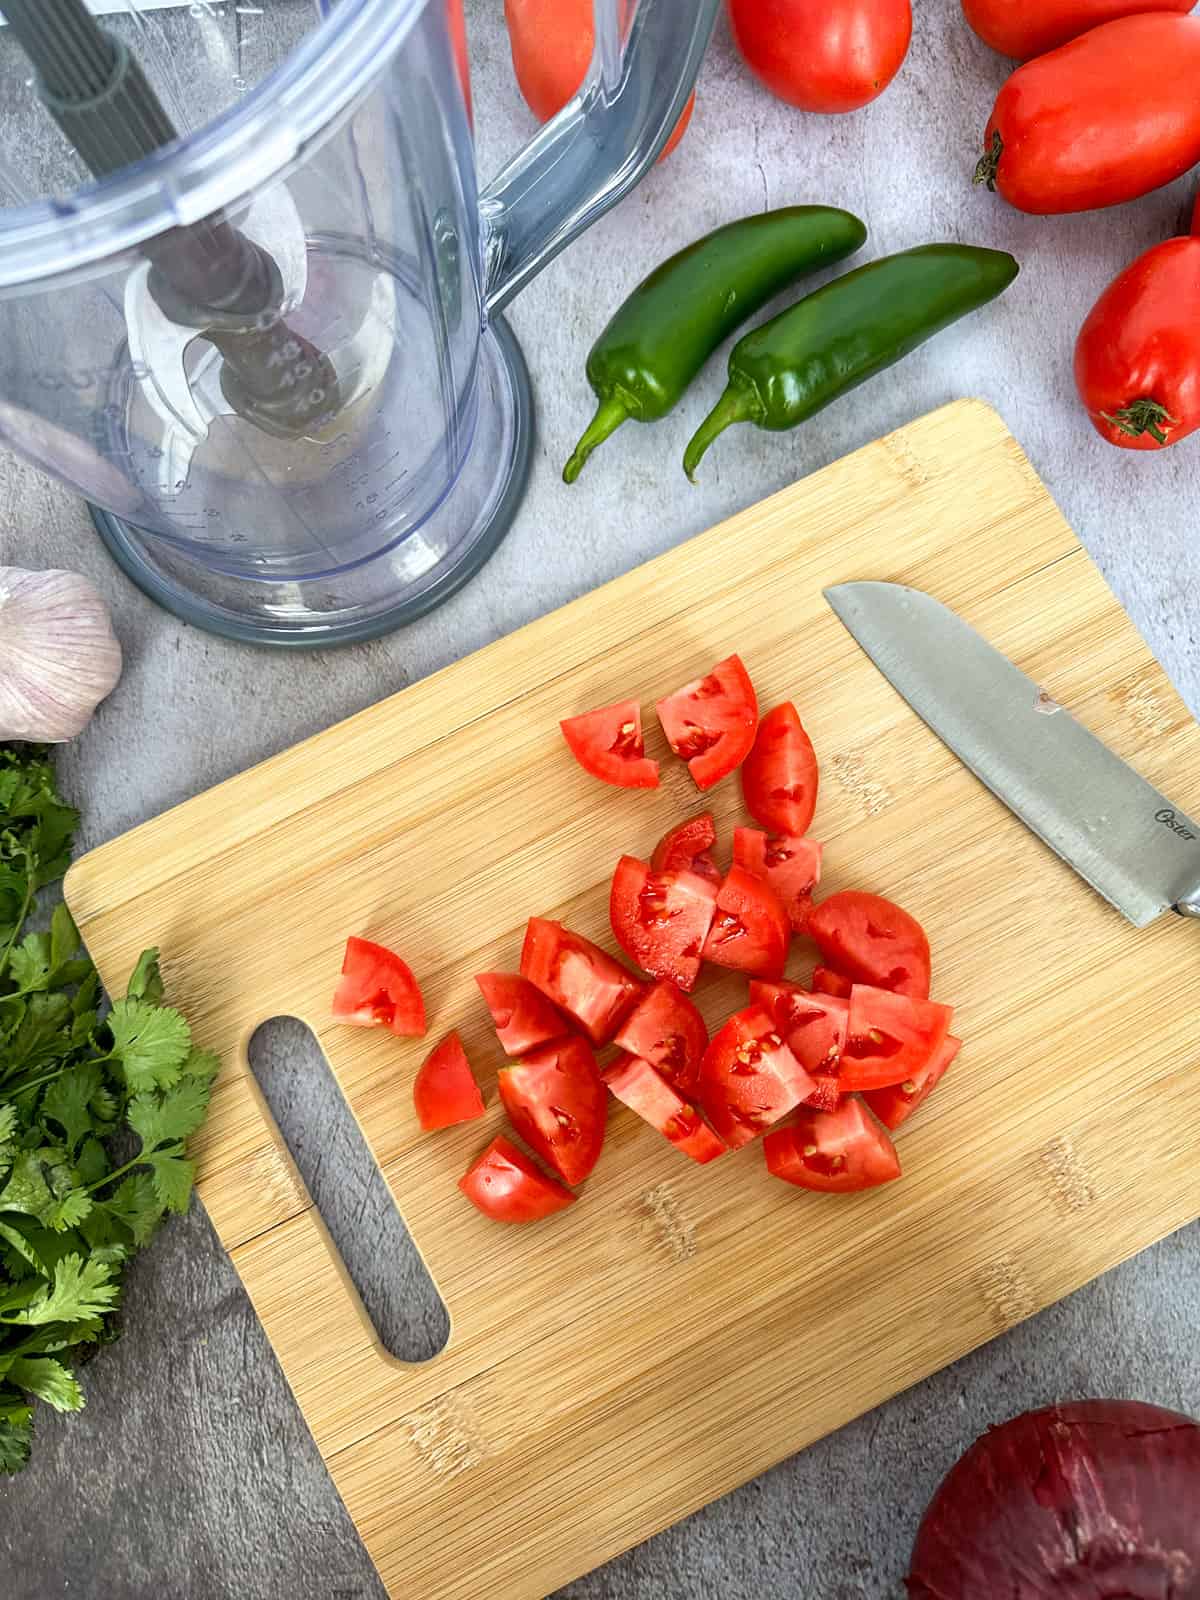 chopping tomatoes on a cutting board with cilantro, jalapenos, and garlic on the side